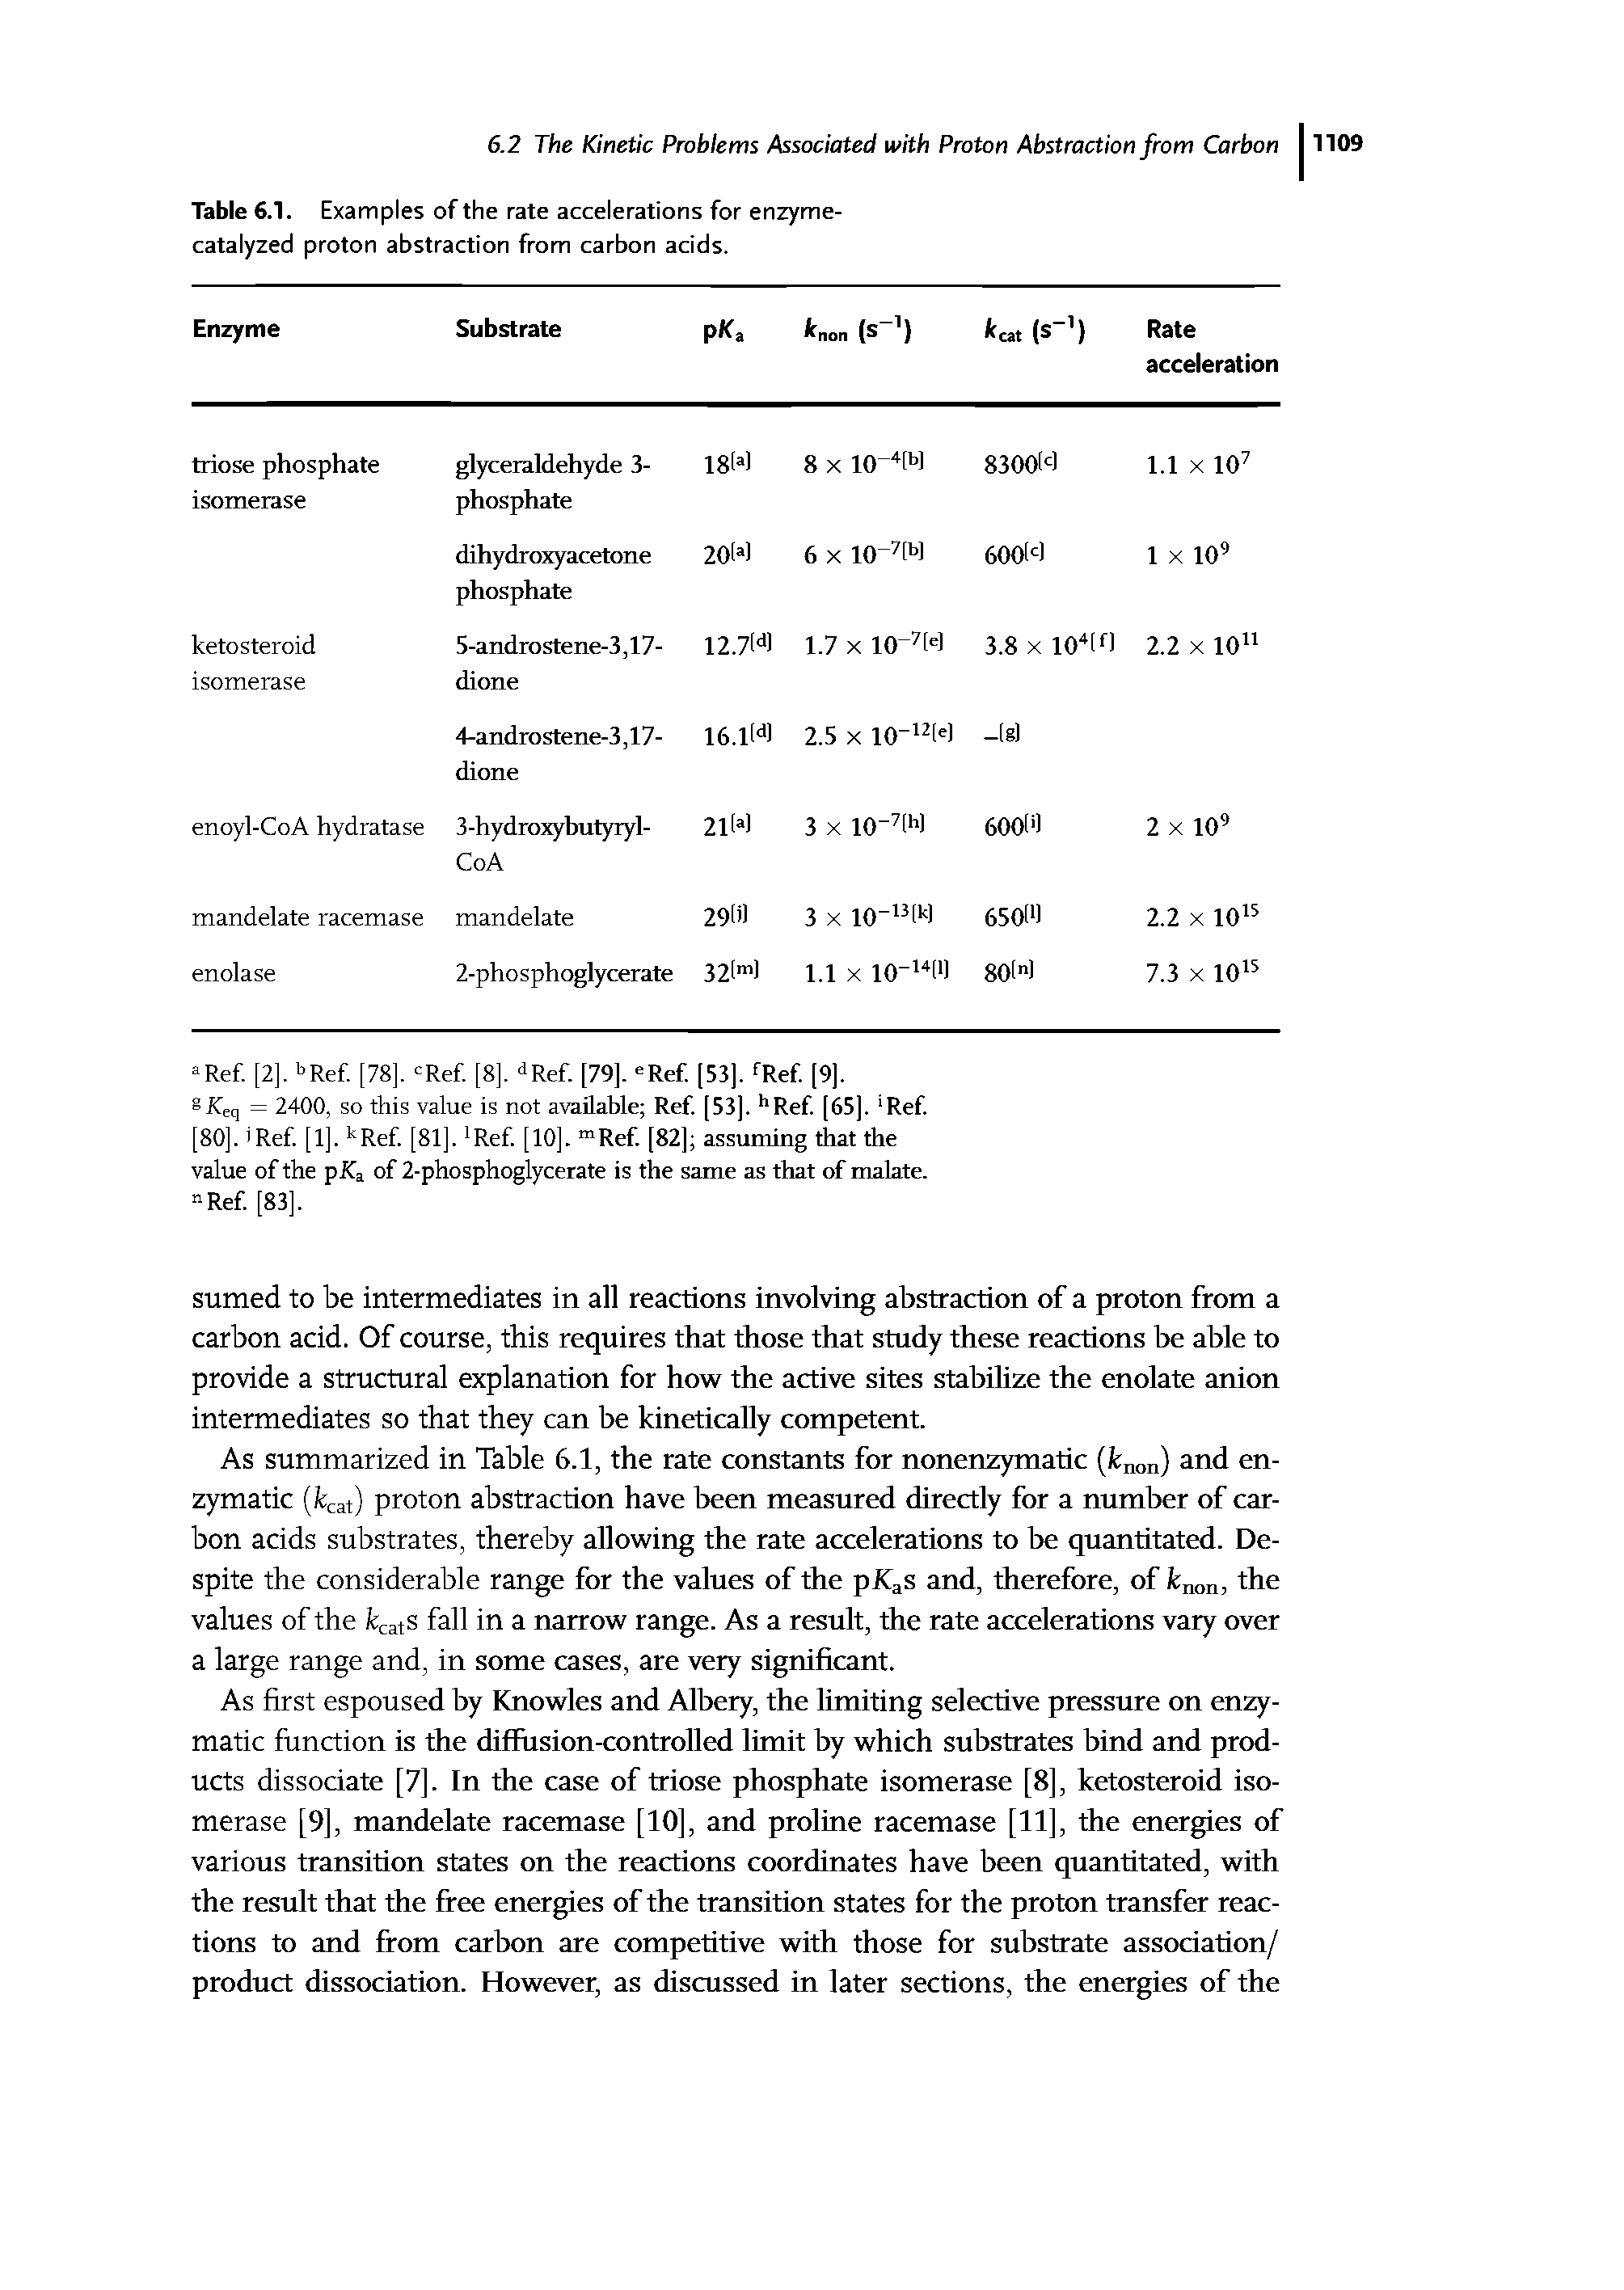 Table 6.1. Examples of the rate accelerations for enzyme-catalyzed proton abstraction from carbon acids.